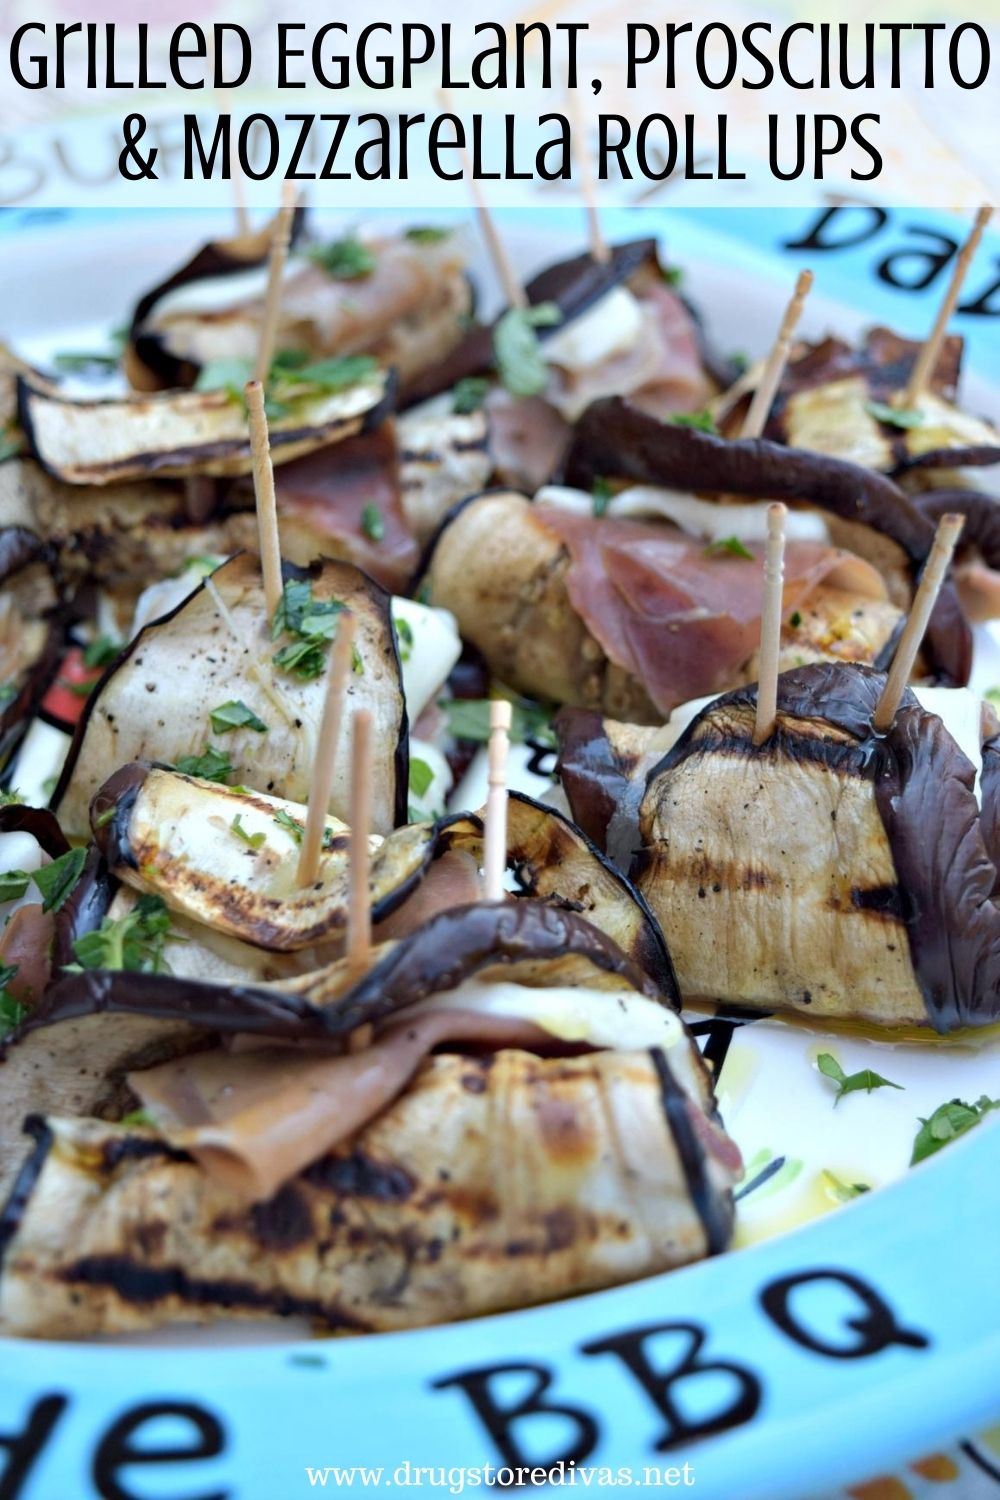 Be the hit of the party when you serve these Grilled Eggplant, Prosciutto & Mozzarella Roll Ups. They're the perfect one bite appetizer.